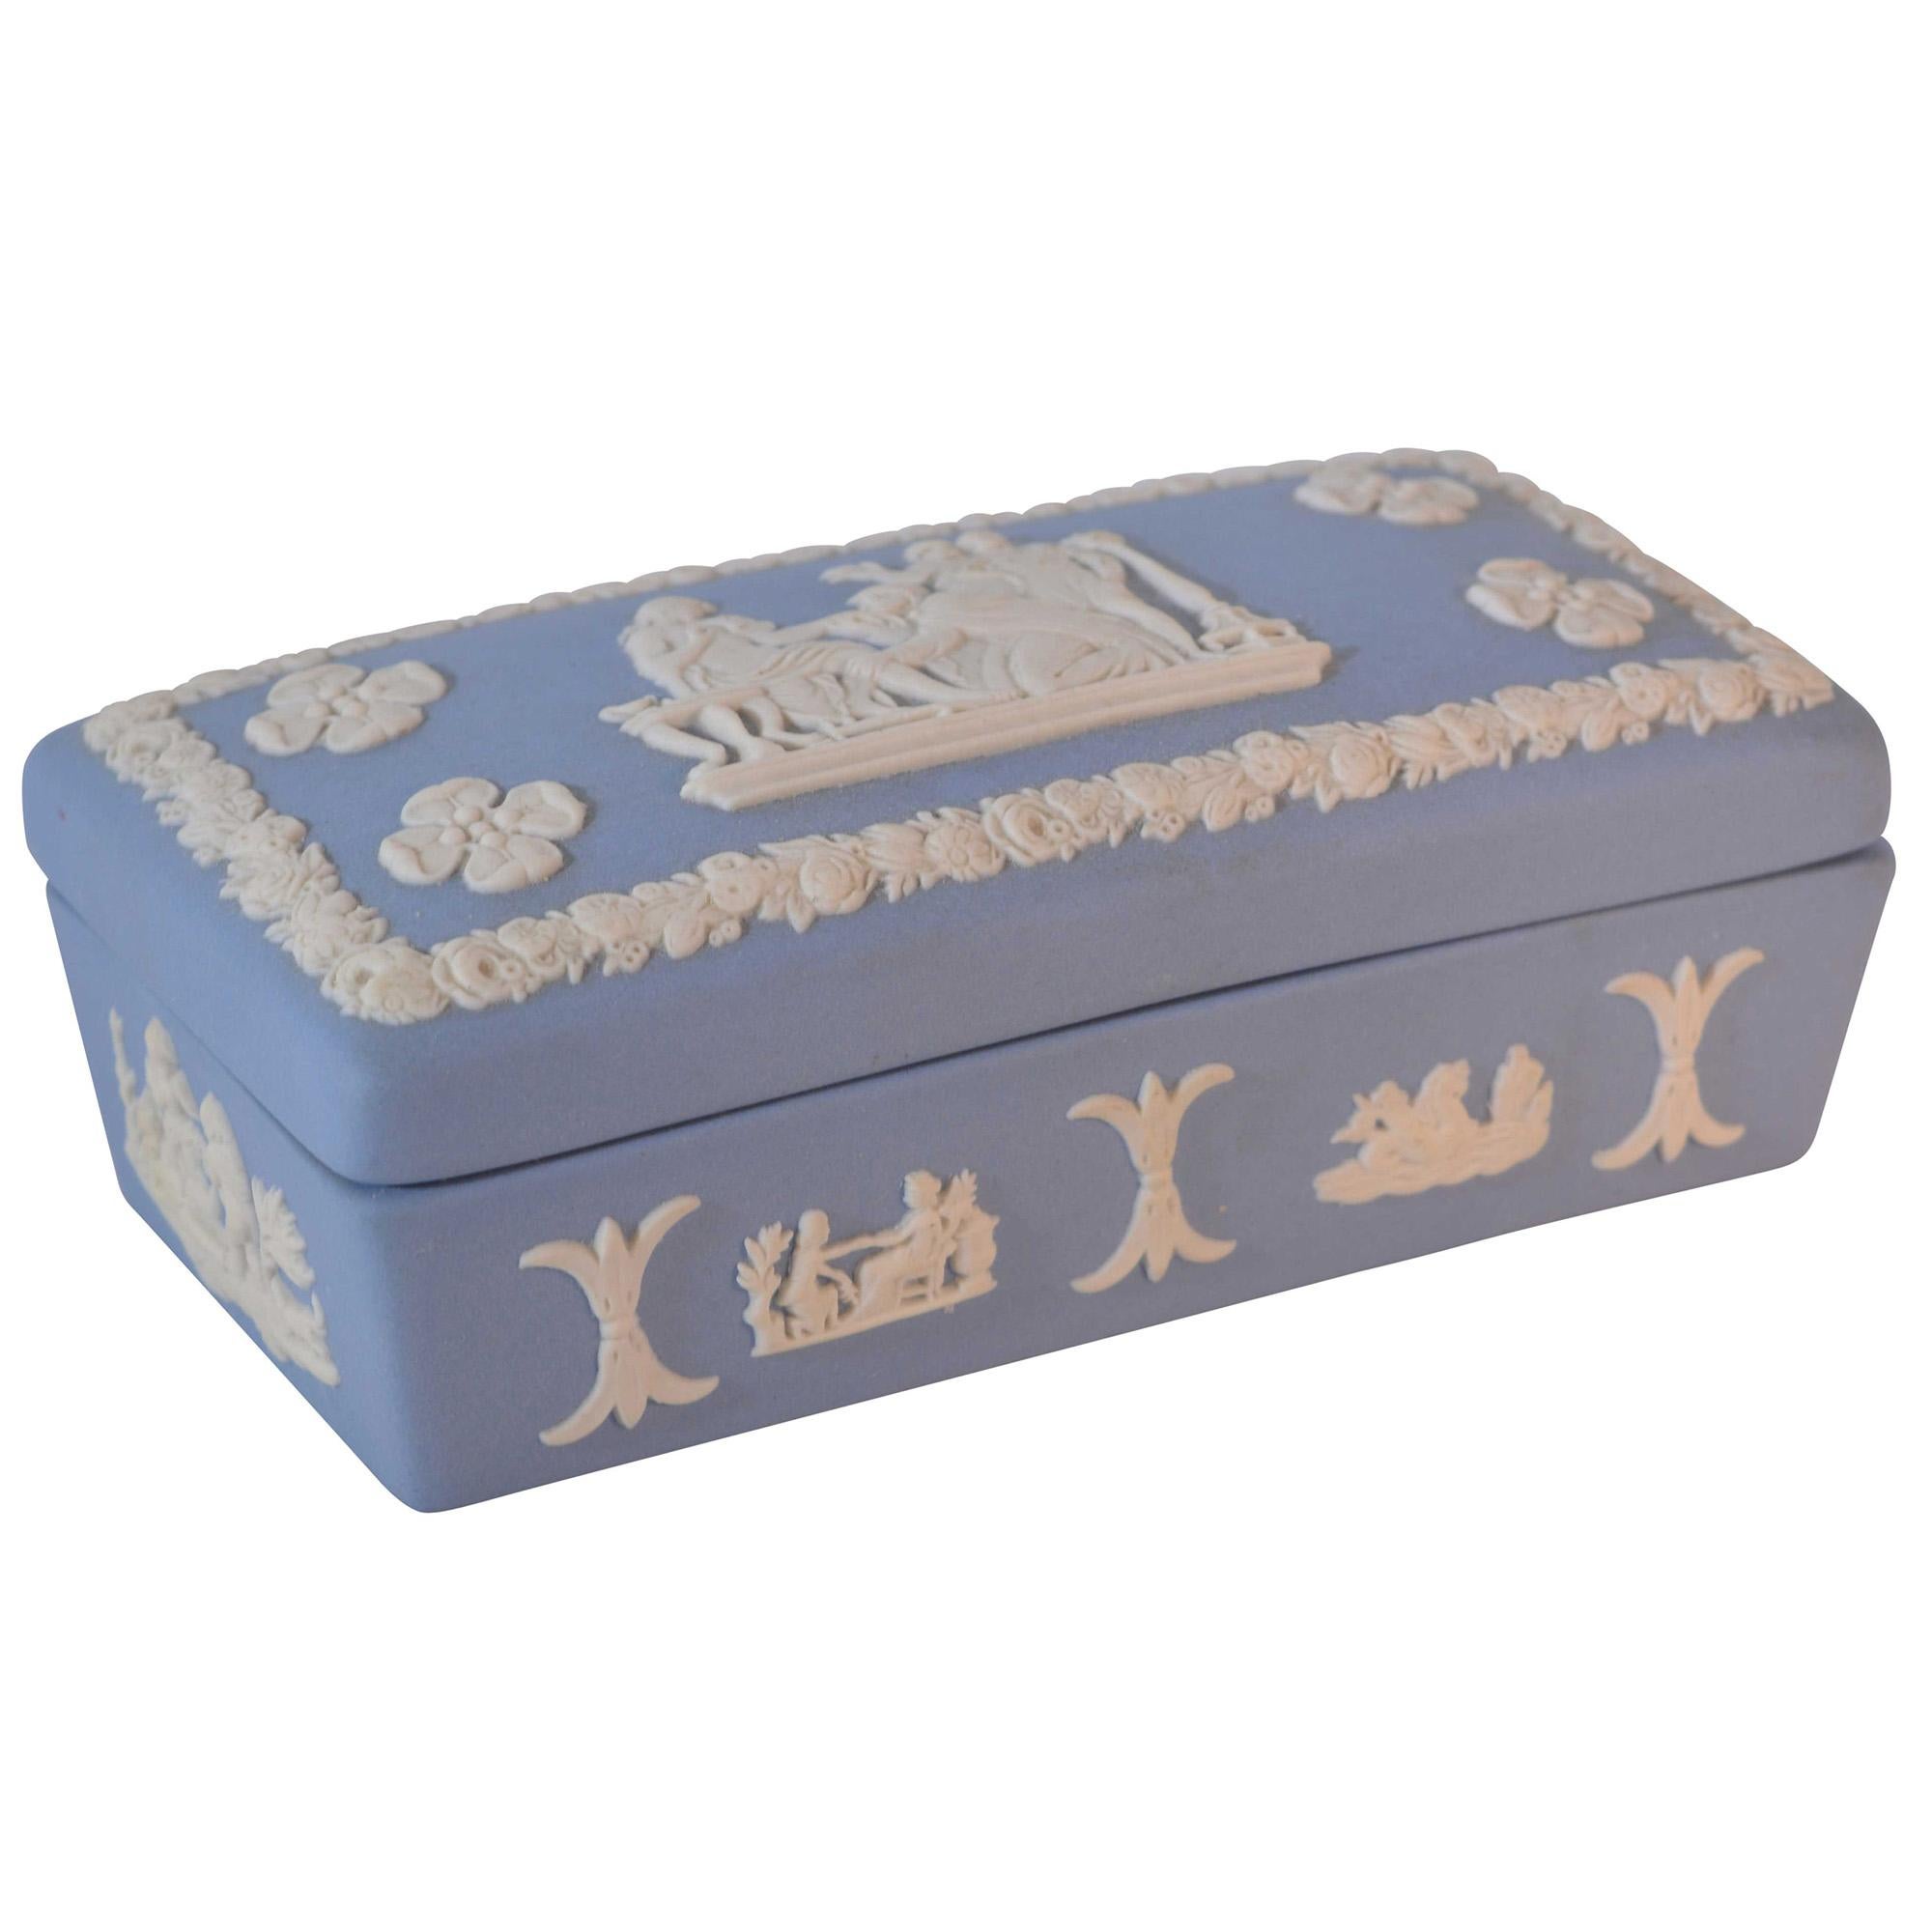 Wedgwood light blue trinket box has a lidded top with a scene of a Grecian maiden surrounded by admirers. All for sides have raised detail. The soft blue and ivory white detailed trinket box makes any dressing or makeup table special. 

Dimensions: